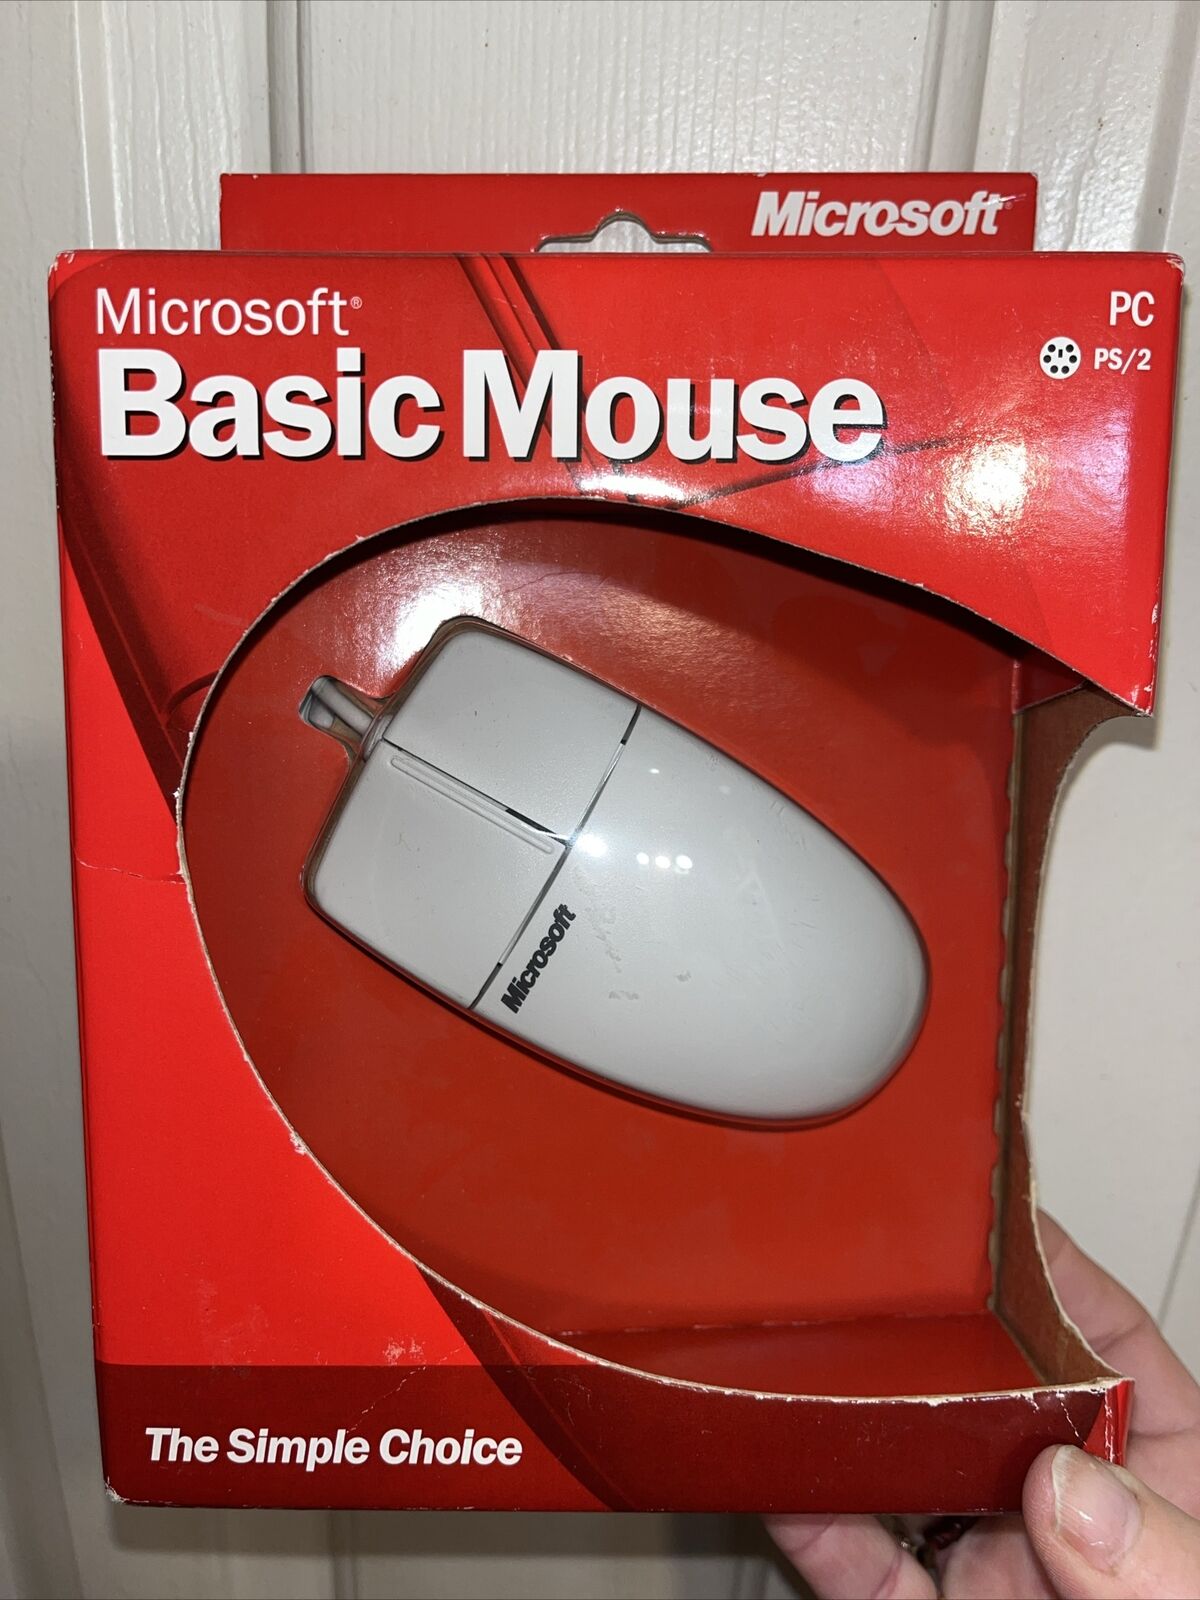 MICROSOFT Basic Mouse 1.0 PS/2 Windows 98 2000 Computer Wired New In Box